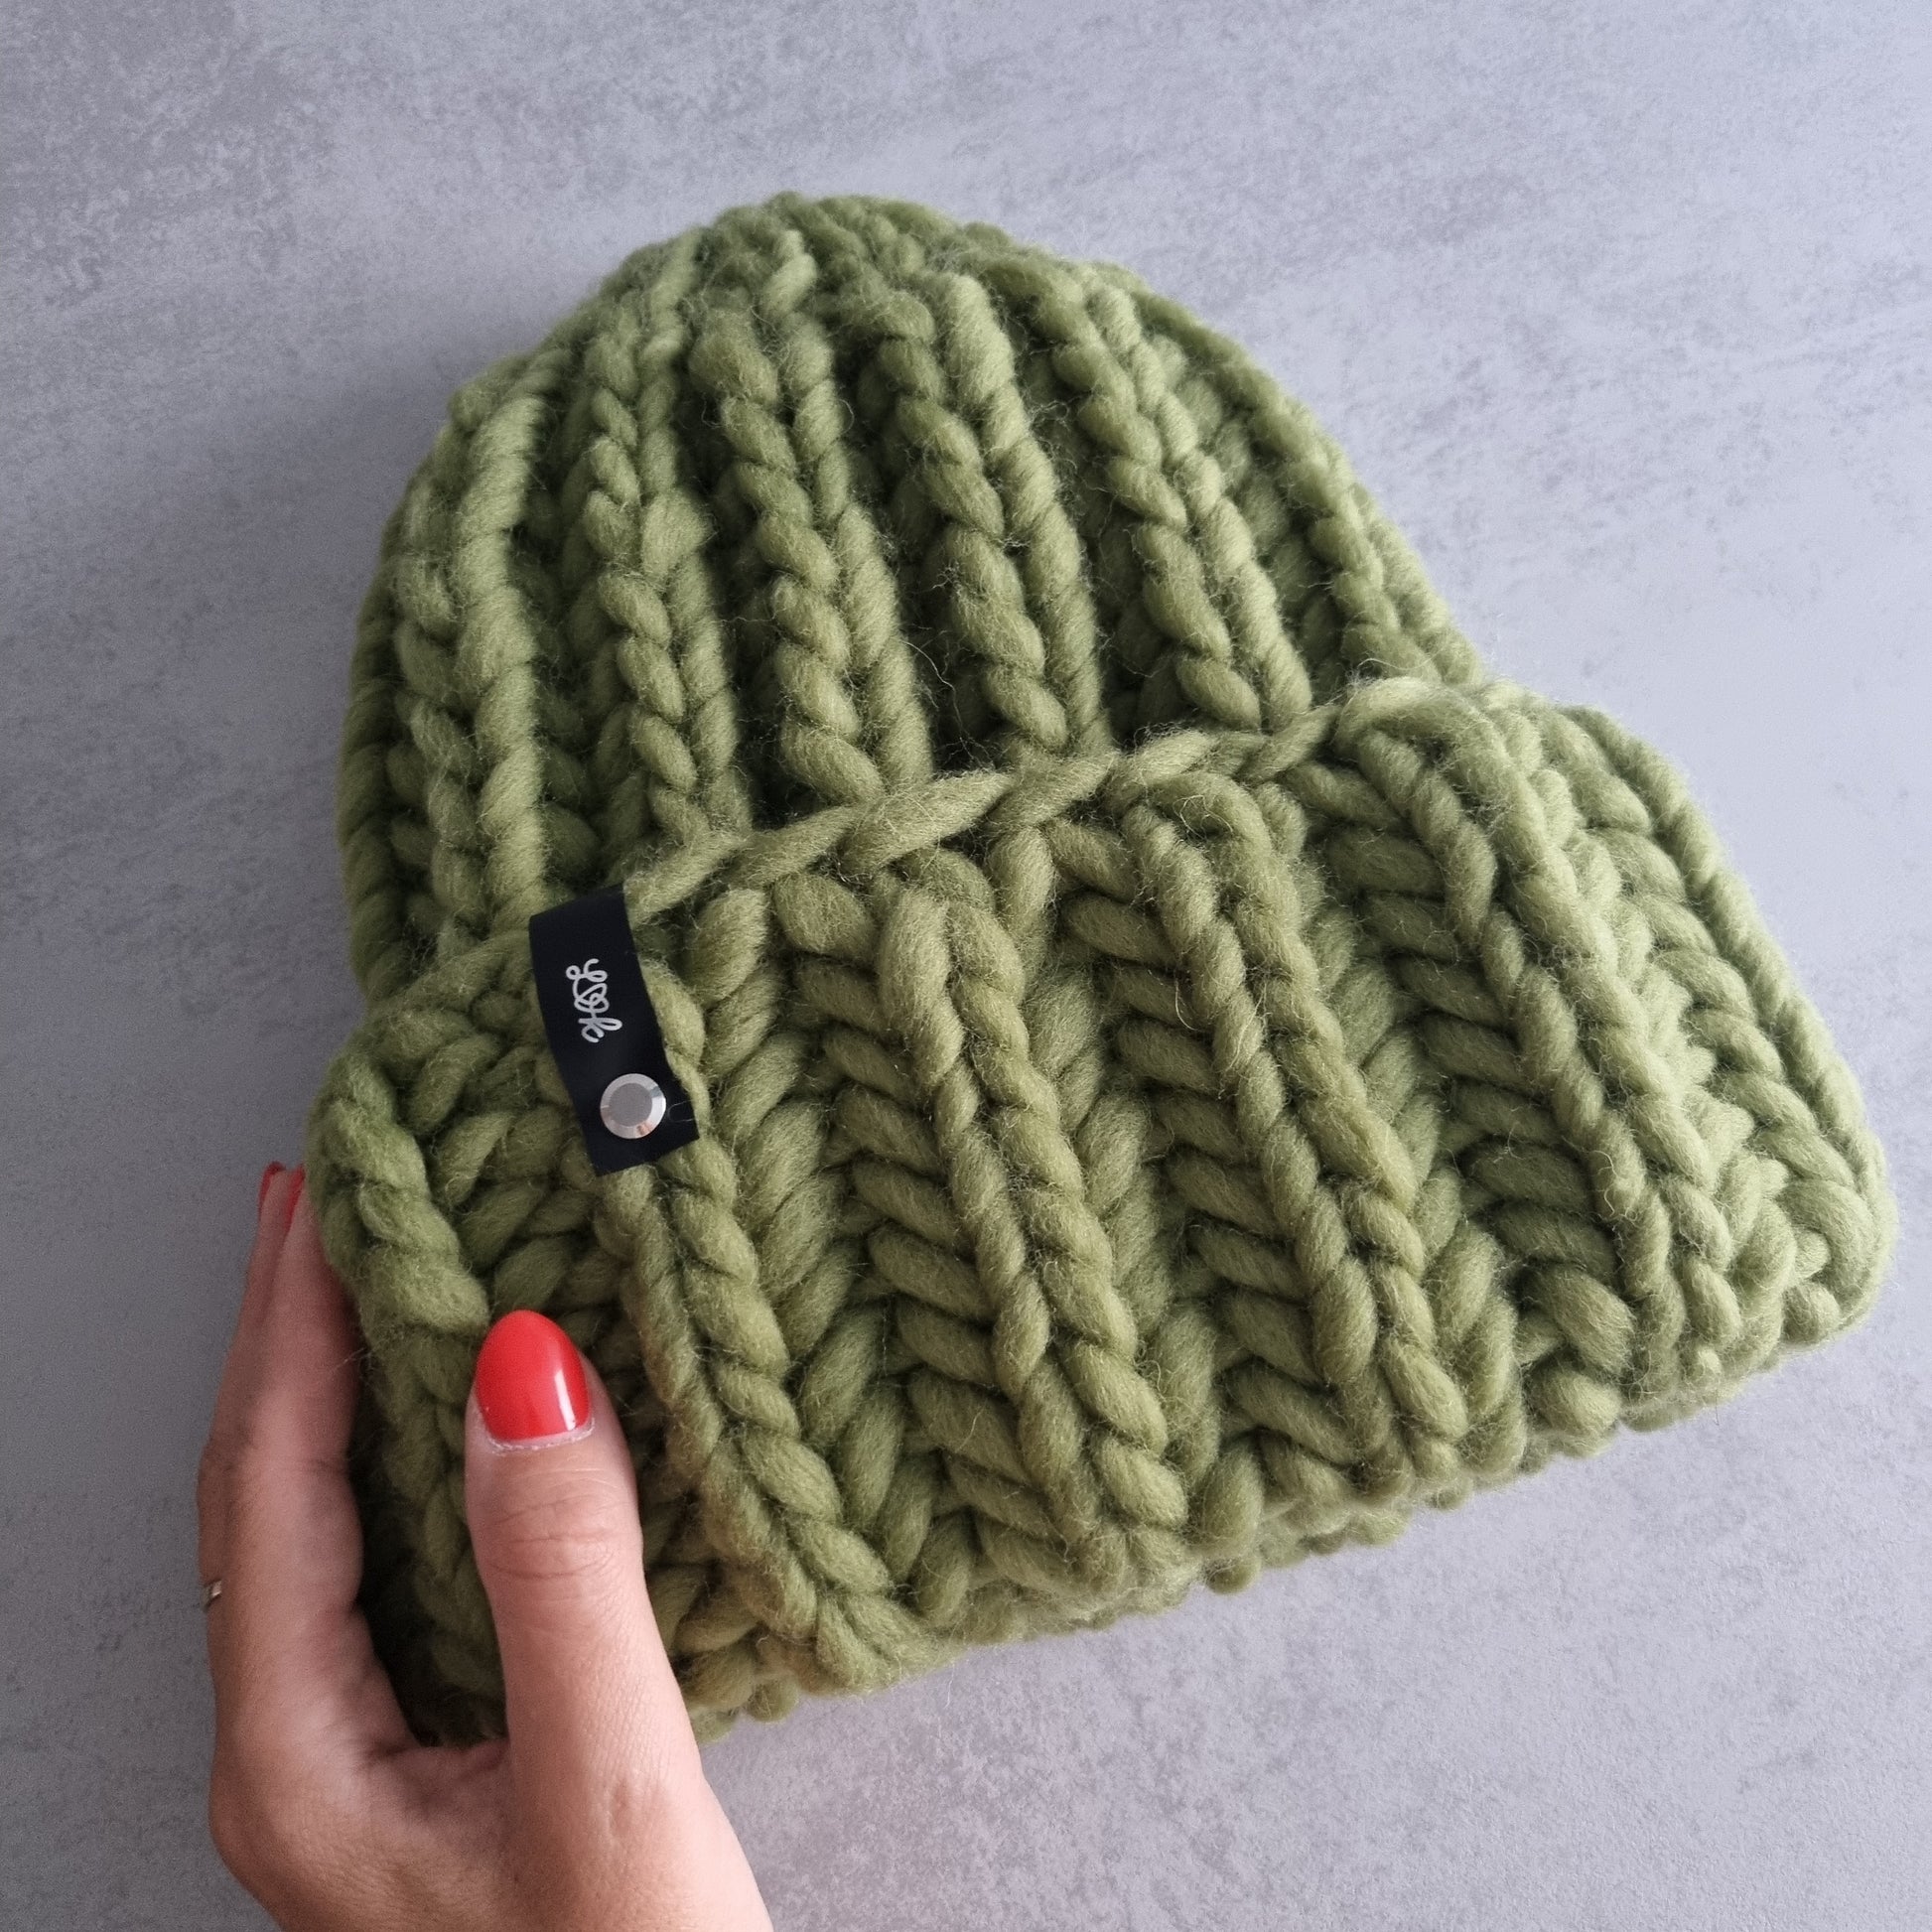 wool lenalovesknitting made Hand-knitted extra beanie – thick of